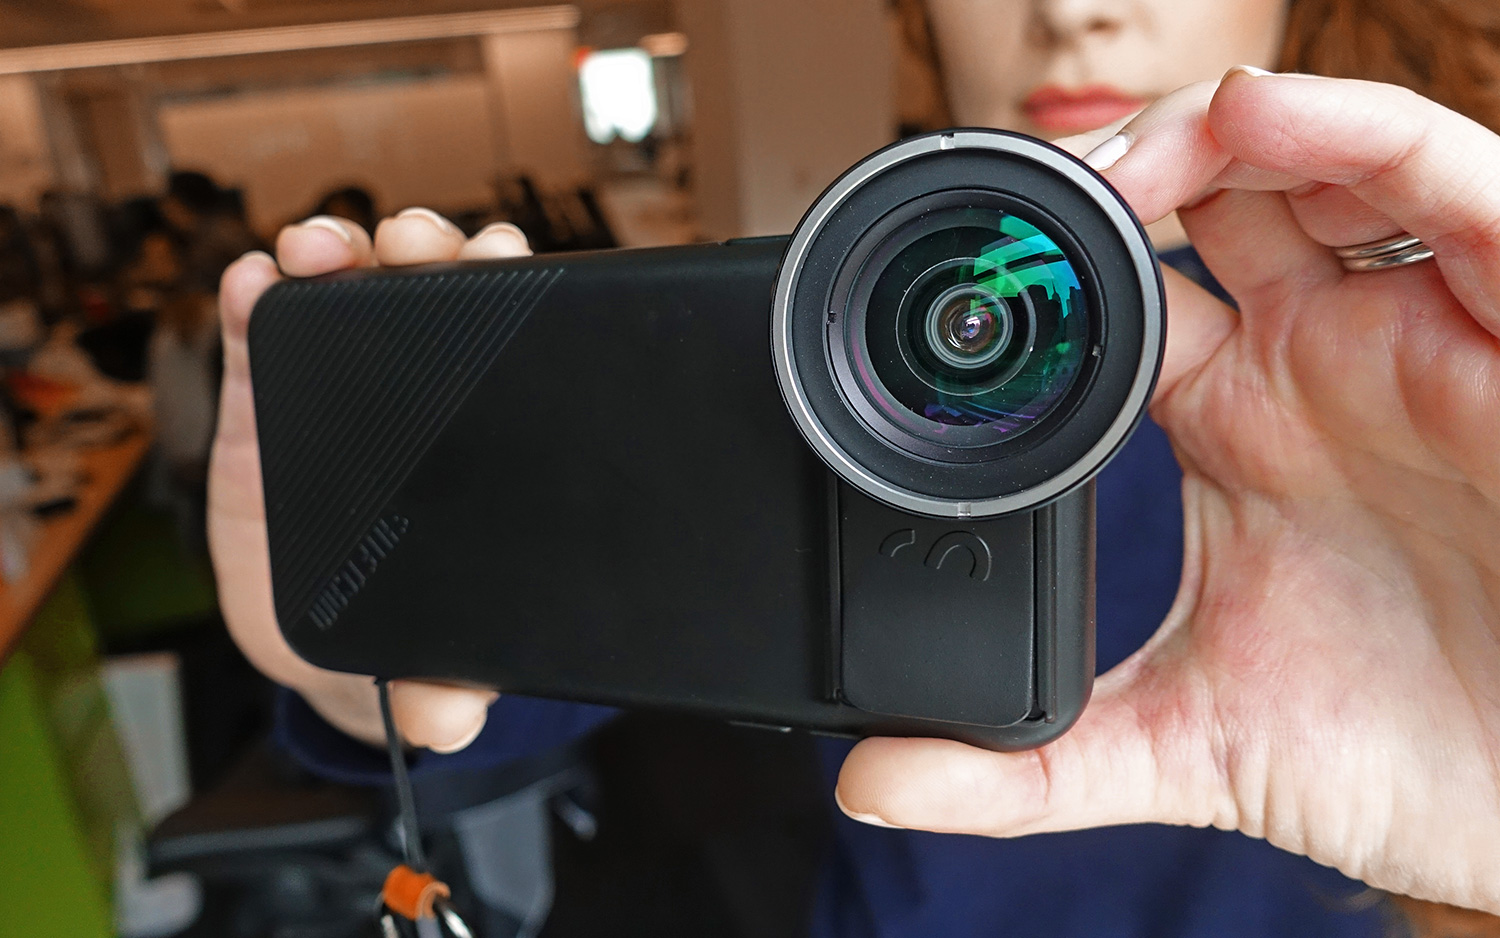 Shiftcam 2.0 ProLens Review: Large but Great